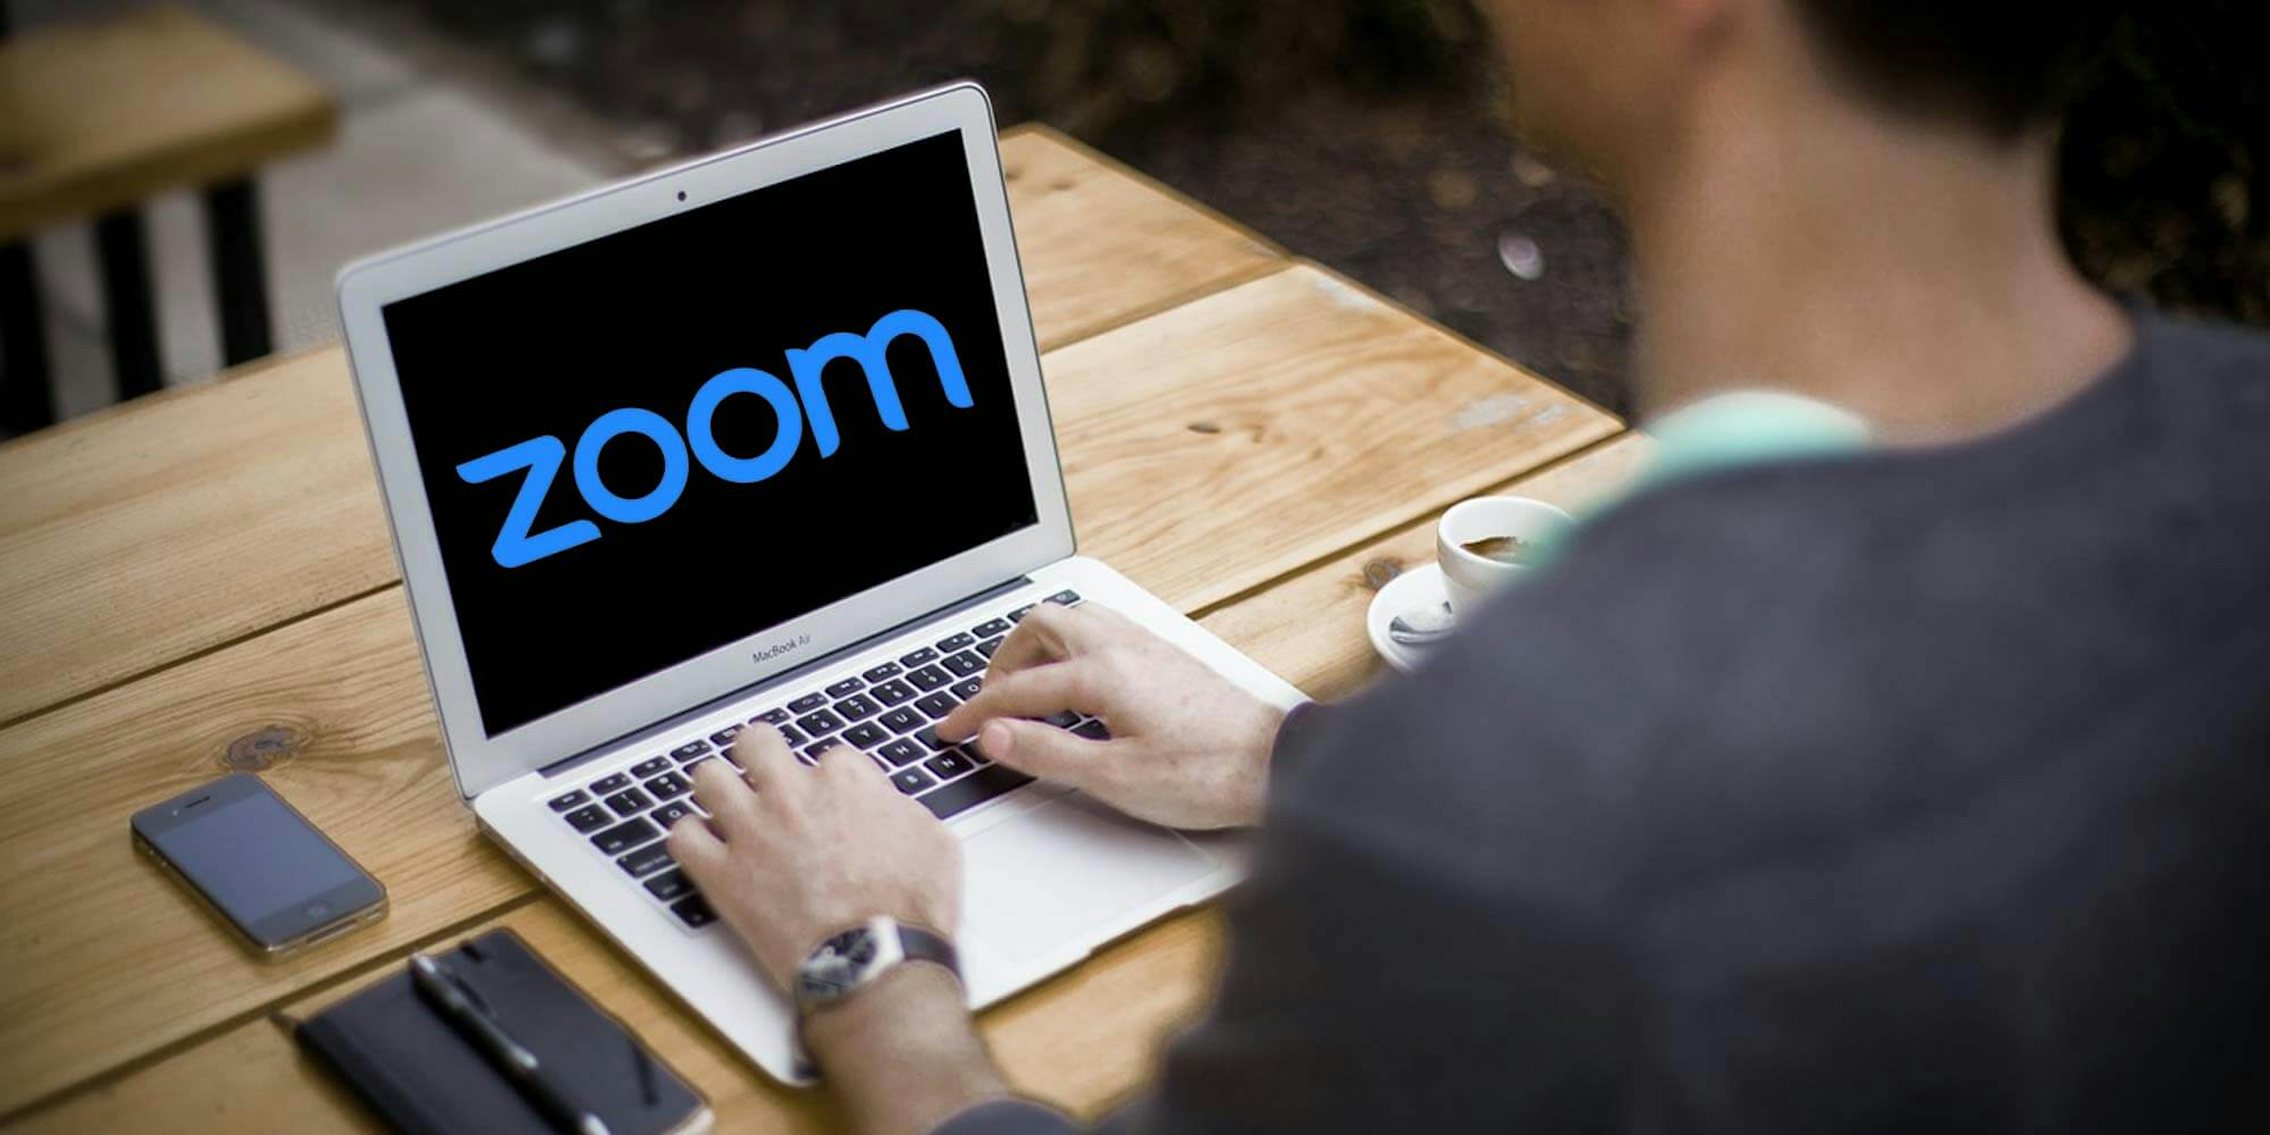 A man sitting in front of a laptop with the Zoom logo